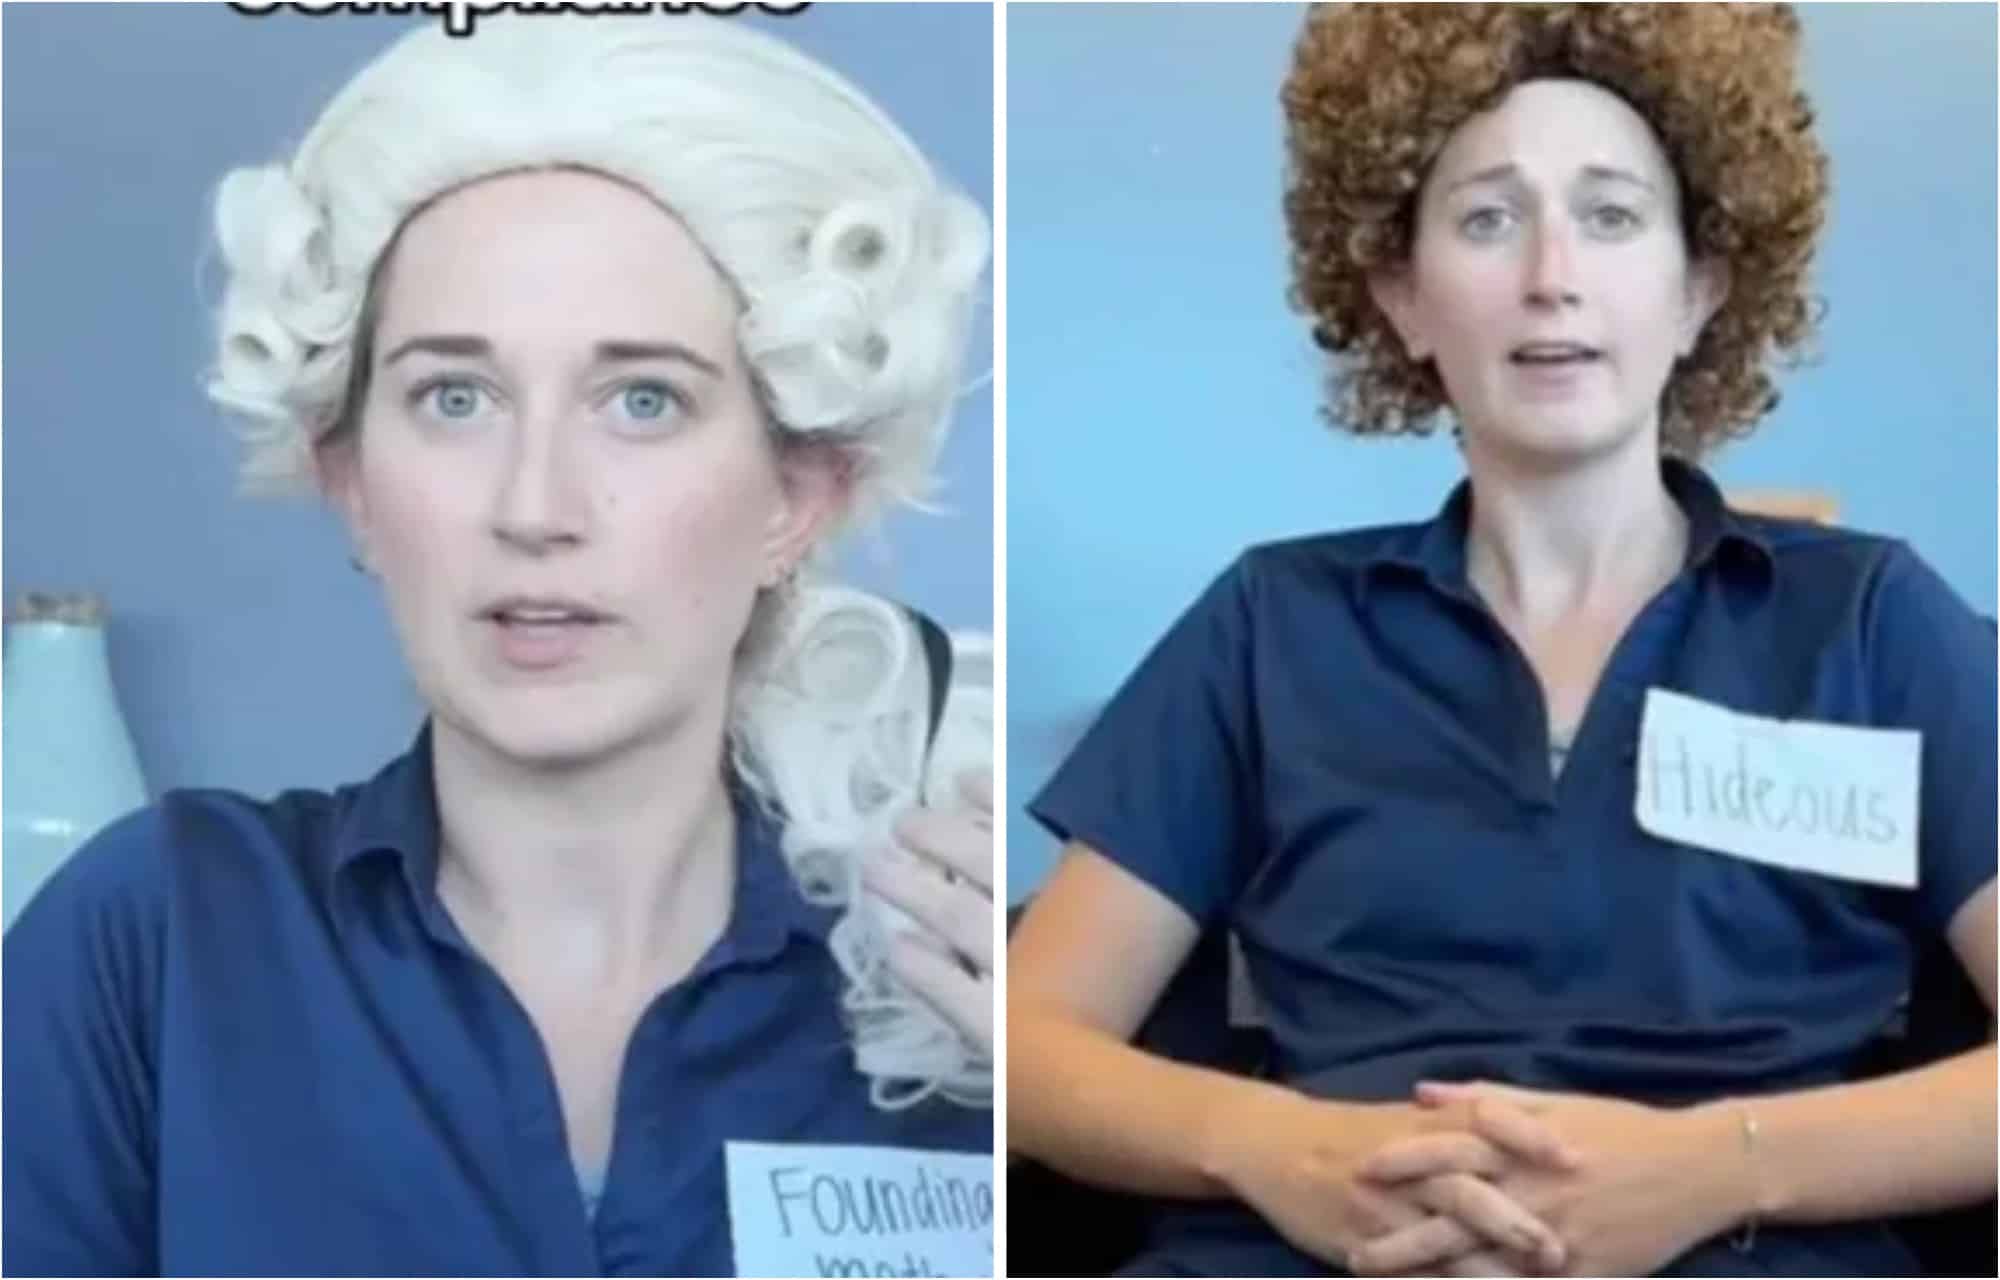 Woman says she started wearing ‘terrible wigs’ after work banned her pink hair